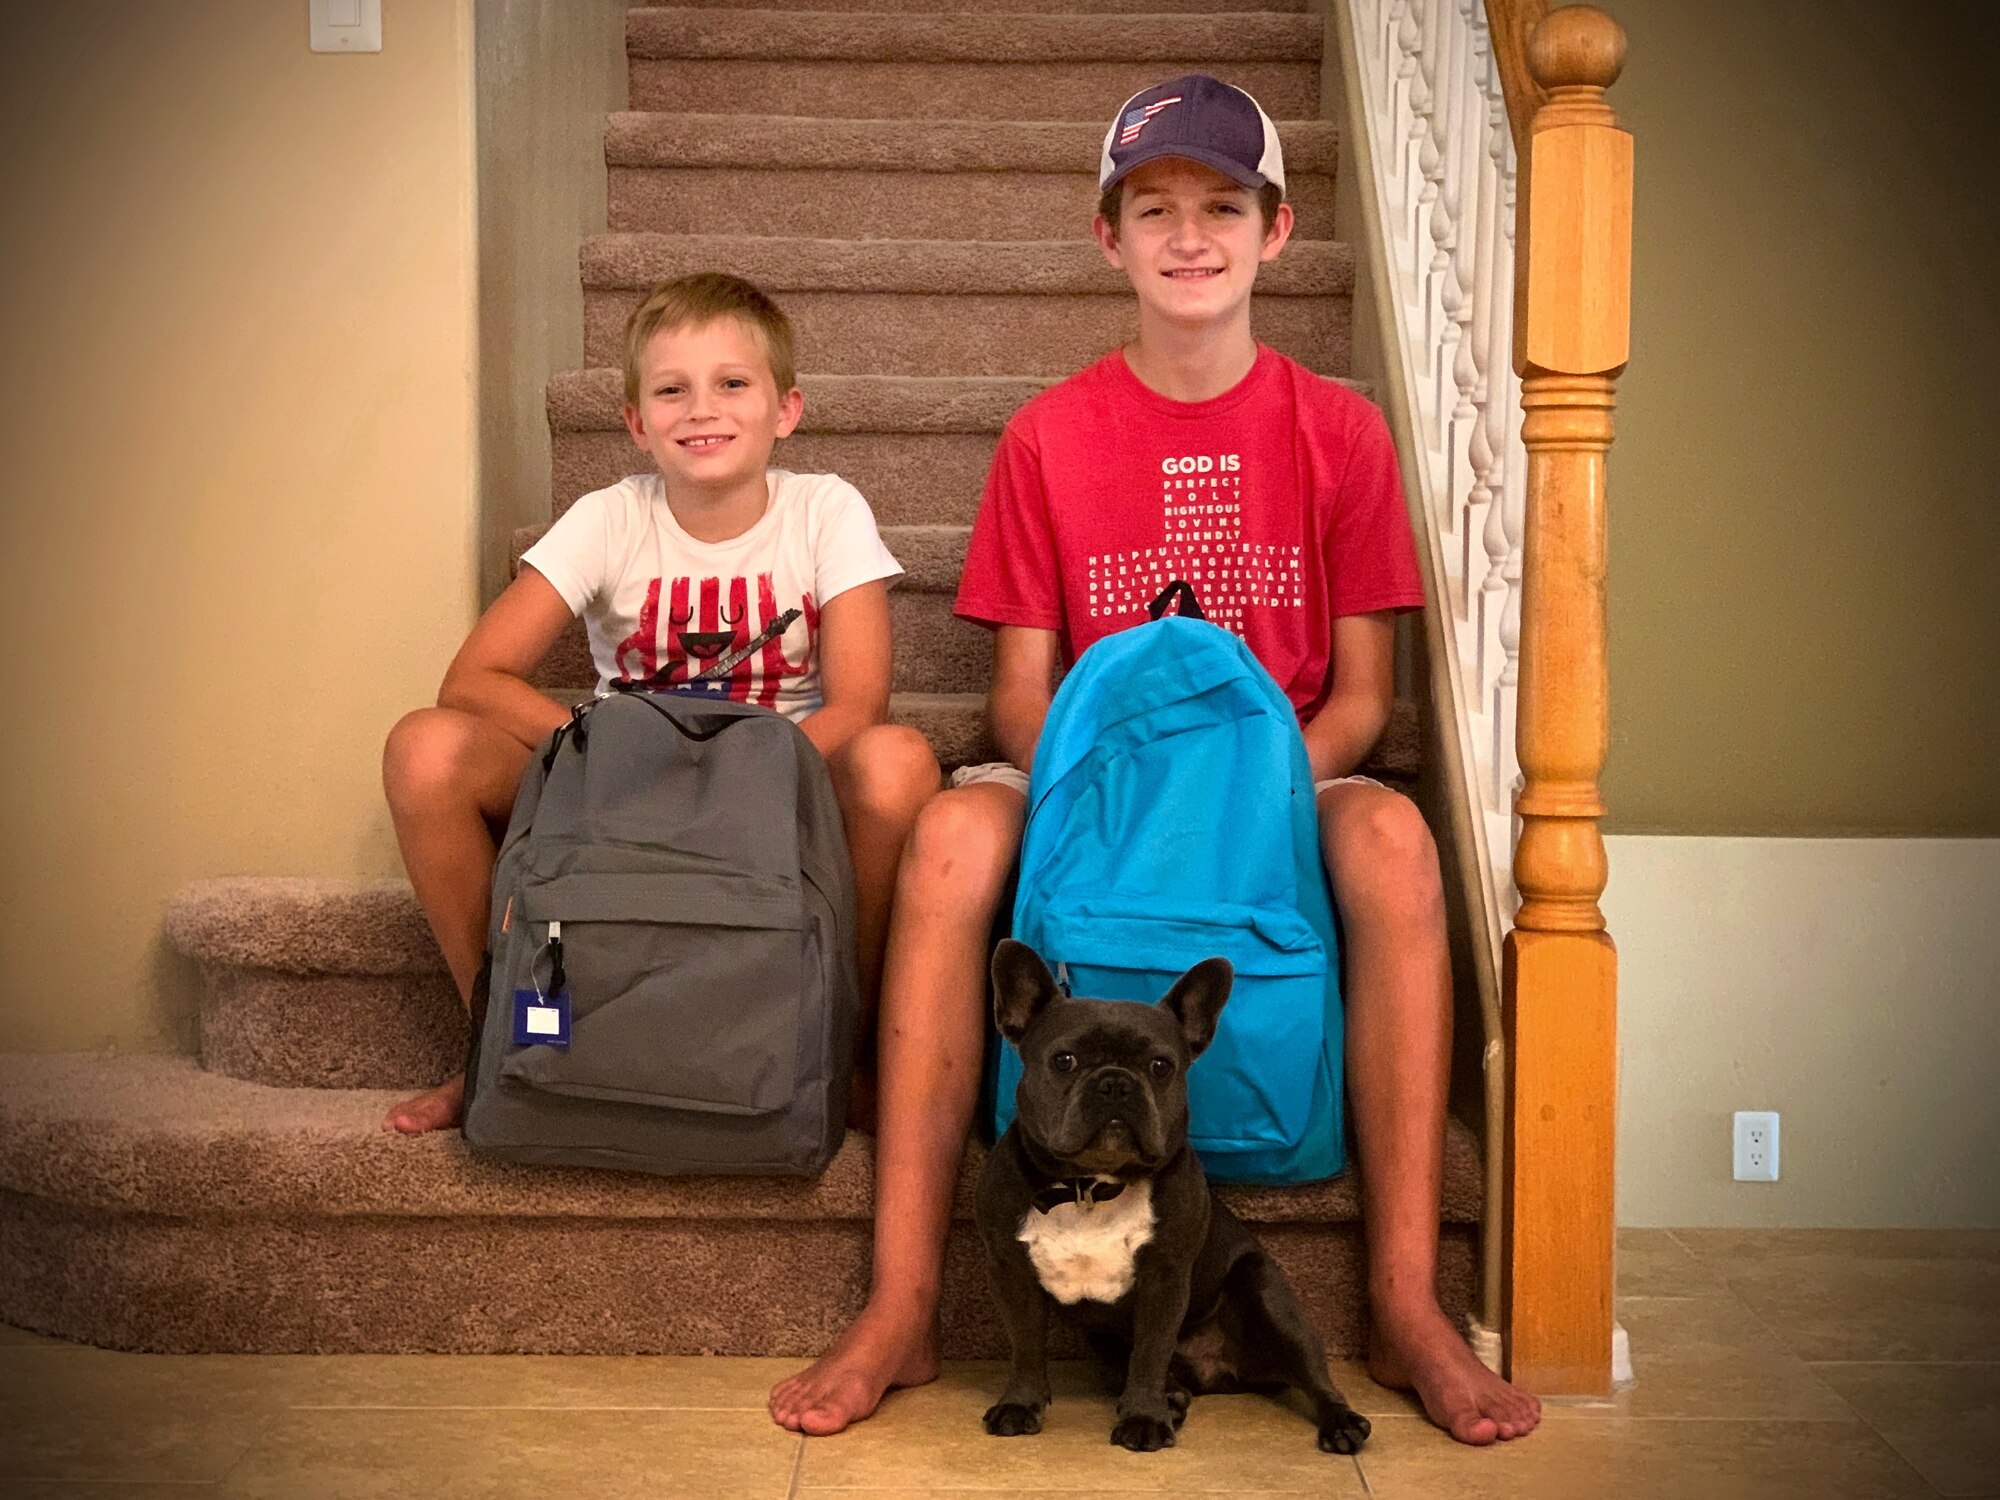 The start of the 2020 school year is unlike one students, teachers, and parents have ever encountered before. School supplies and school shopping has taken on a completely new meaning, with most first days happening in living rooms through virtually learning.